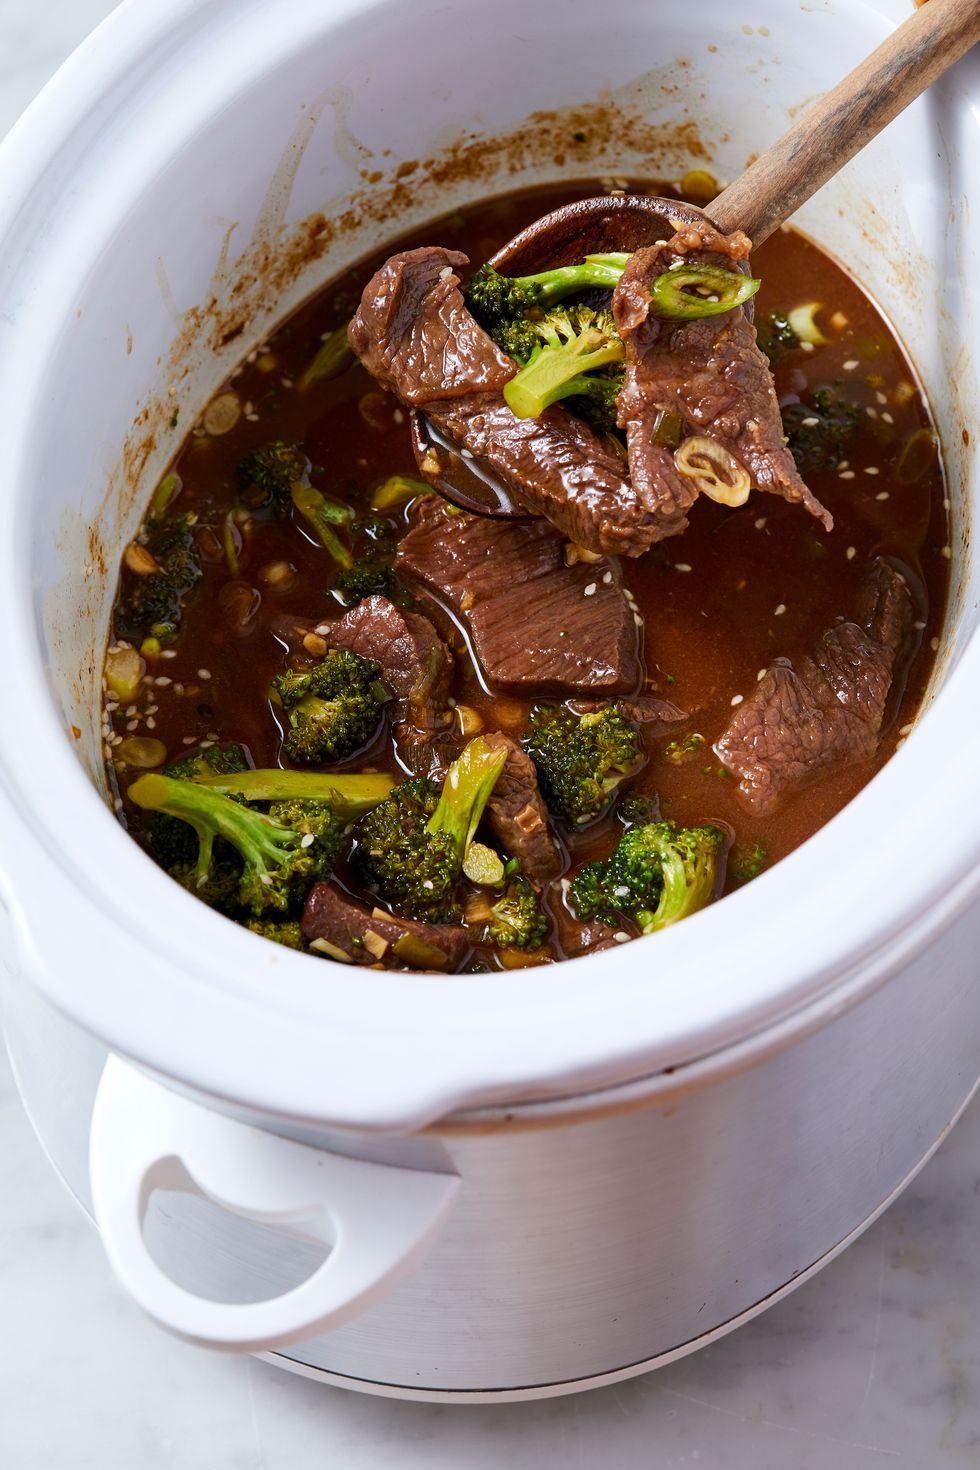 https://hips.hearstapps.com/hmg-prod/images/slow-cookerbeefbroccoli-delish-103-1661878474.jpg?crop=1xw:1xh;center,top&resize=980:*